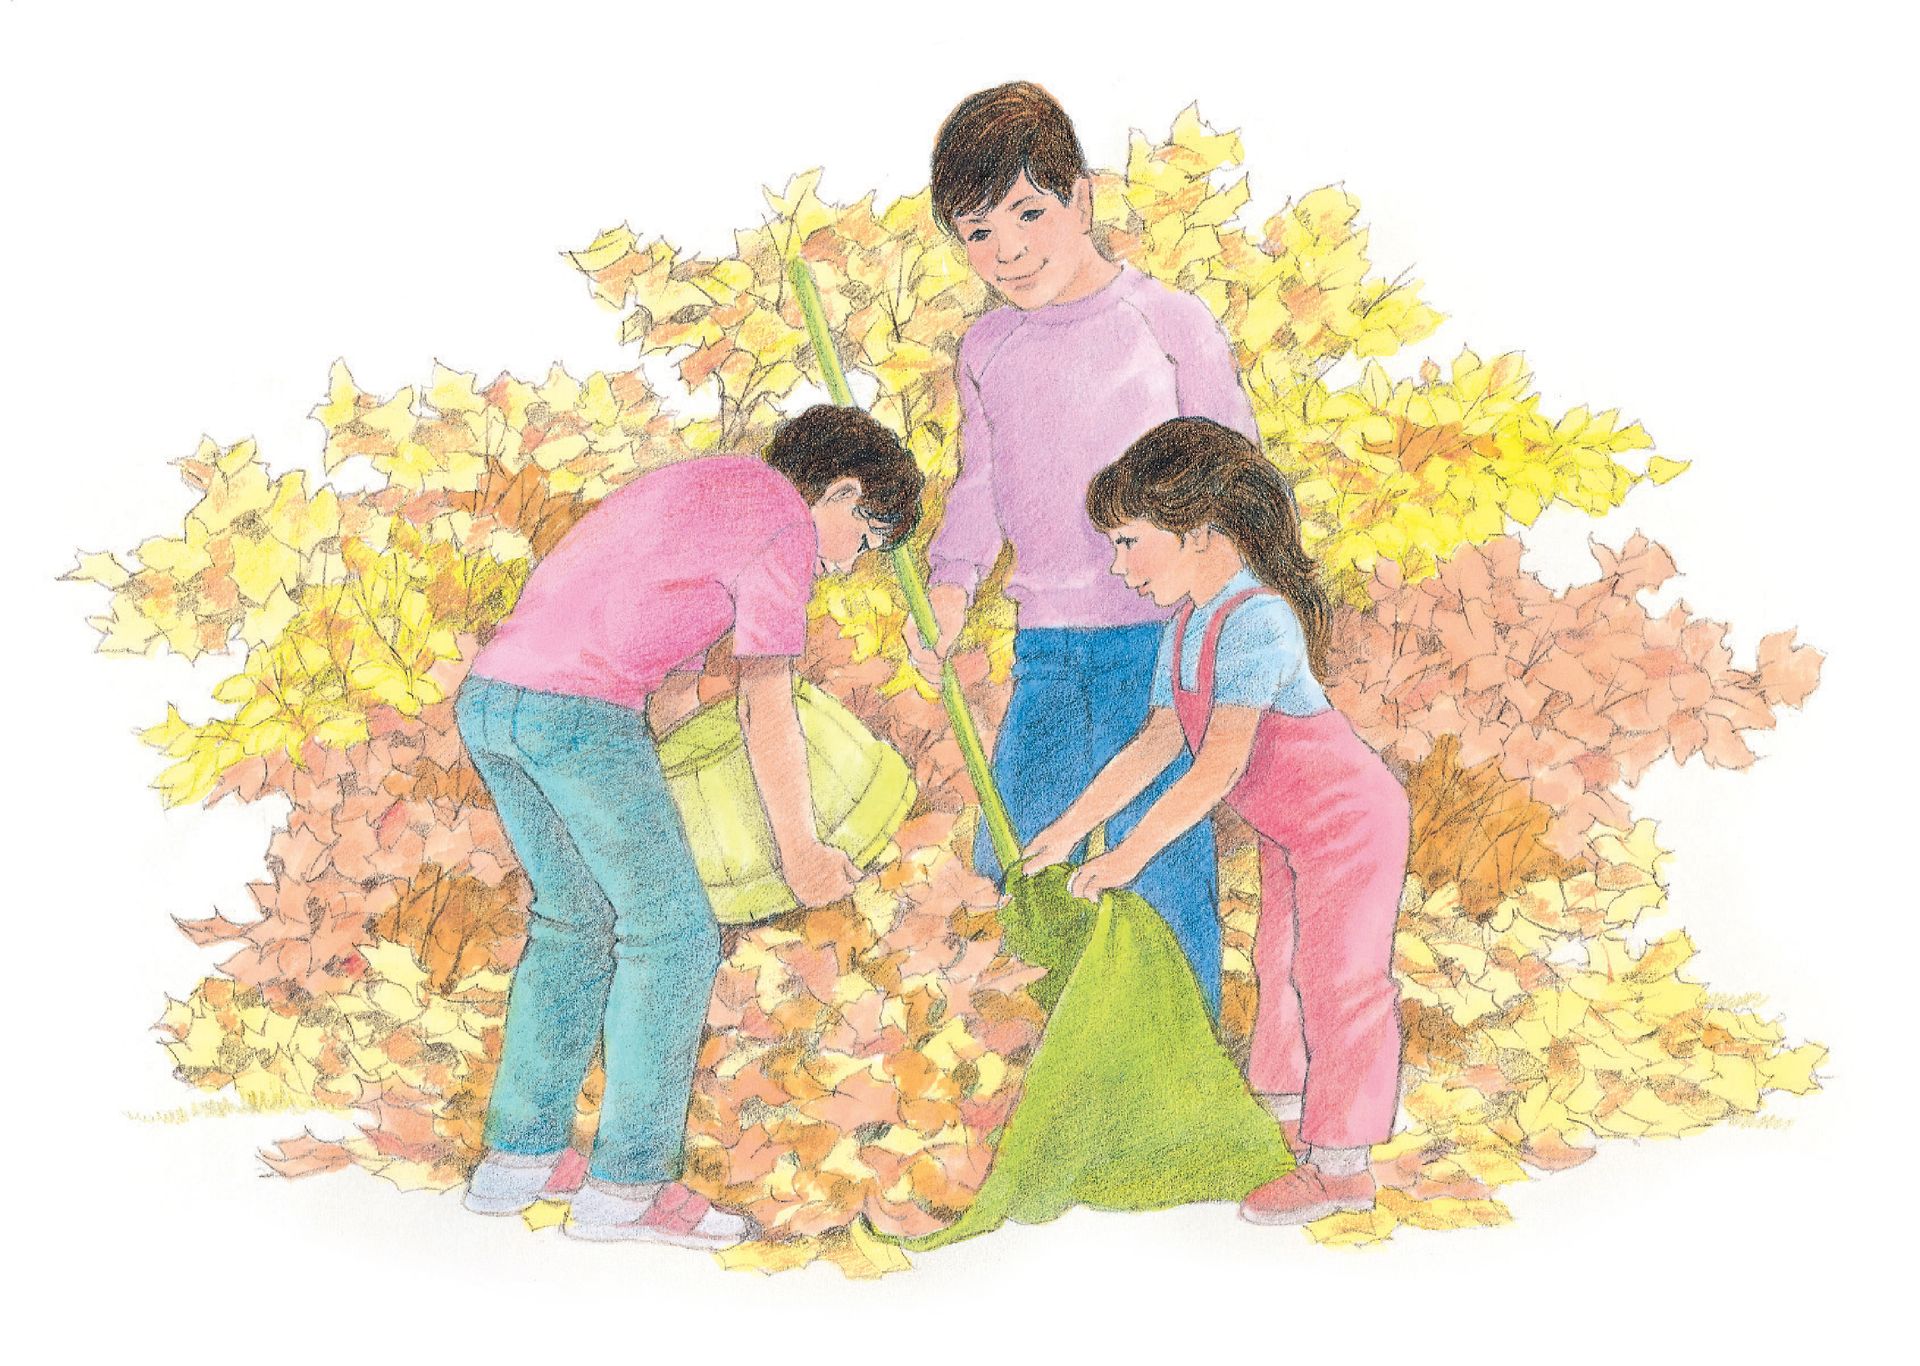 A family raking autumn leaves together. From the Children’s Songbook, page 246, “It’s Autumntime”; watercolor illustration by Virginia Sargent.